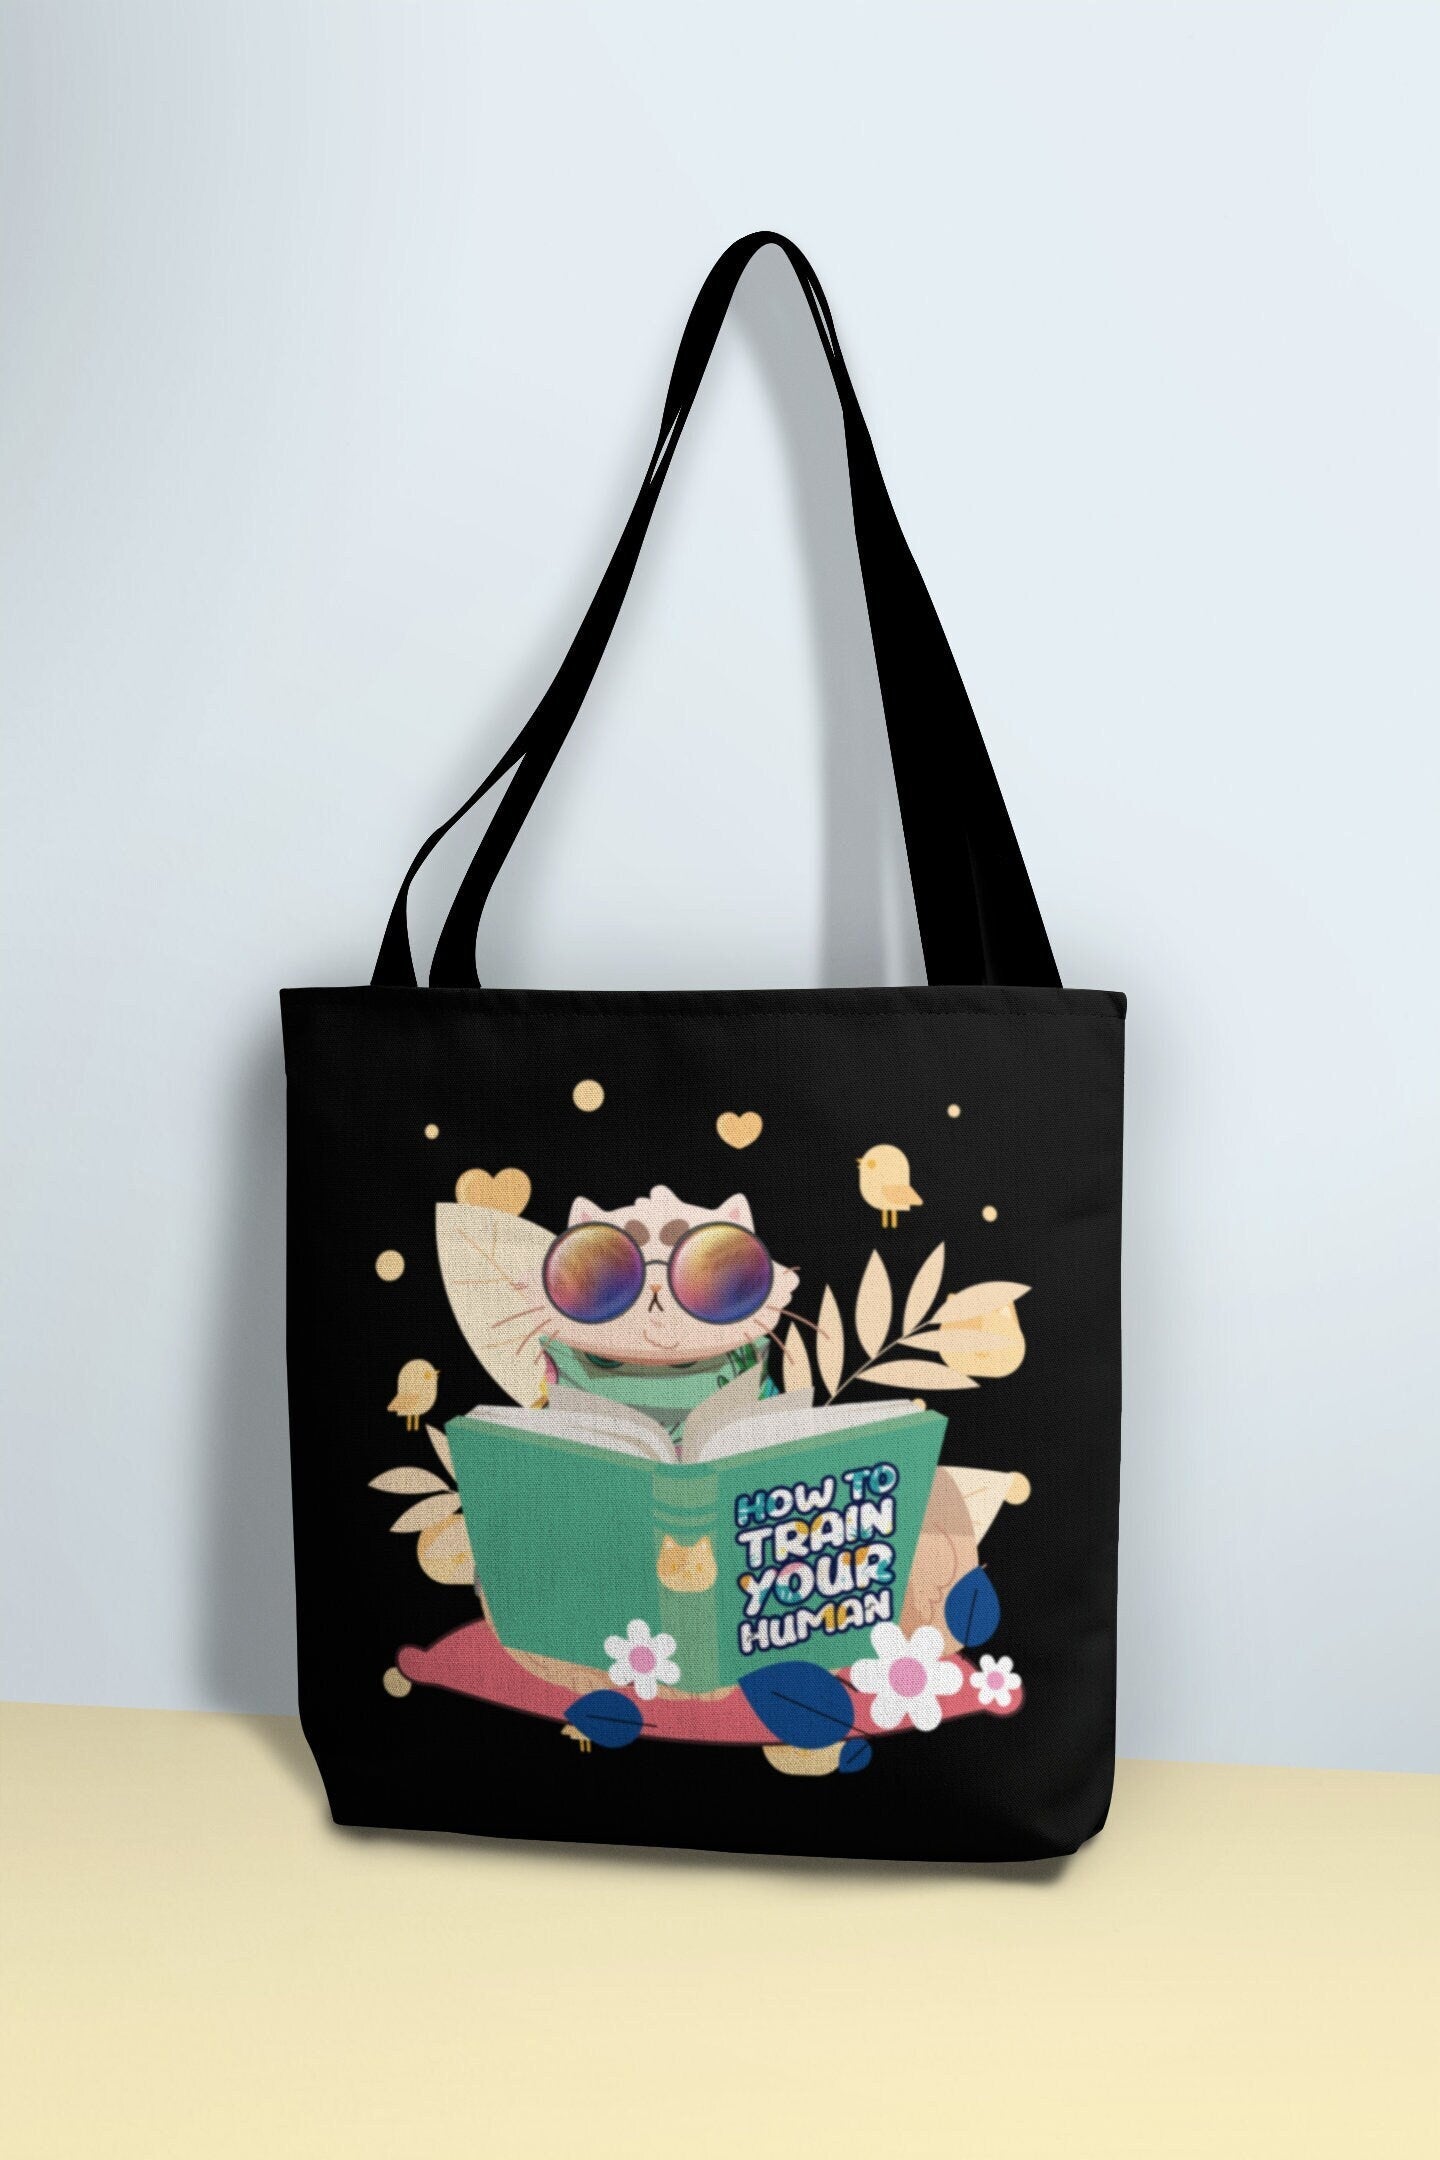 Cat Aesthetic Tote Bag with Pockets, Cat Lovers Gift, Cat Mom Canvas Tote Bag, Nurse Tote Bag, Funny Cat Themed Gifts for Teachers, Cat Dad